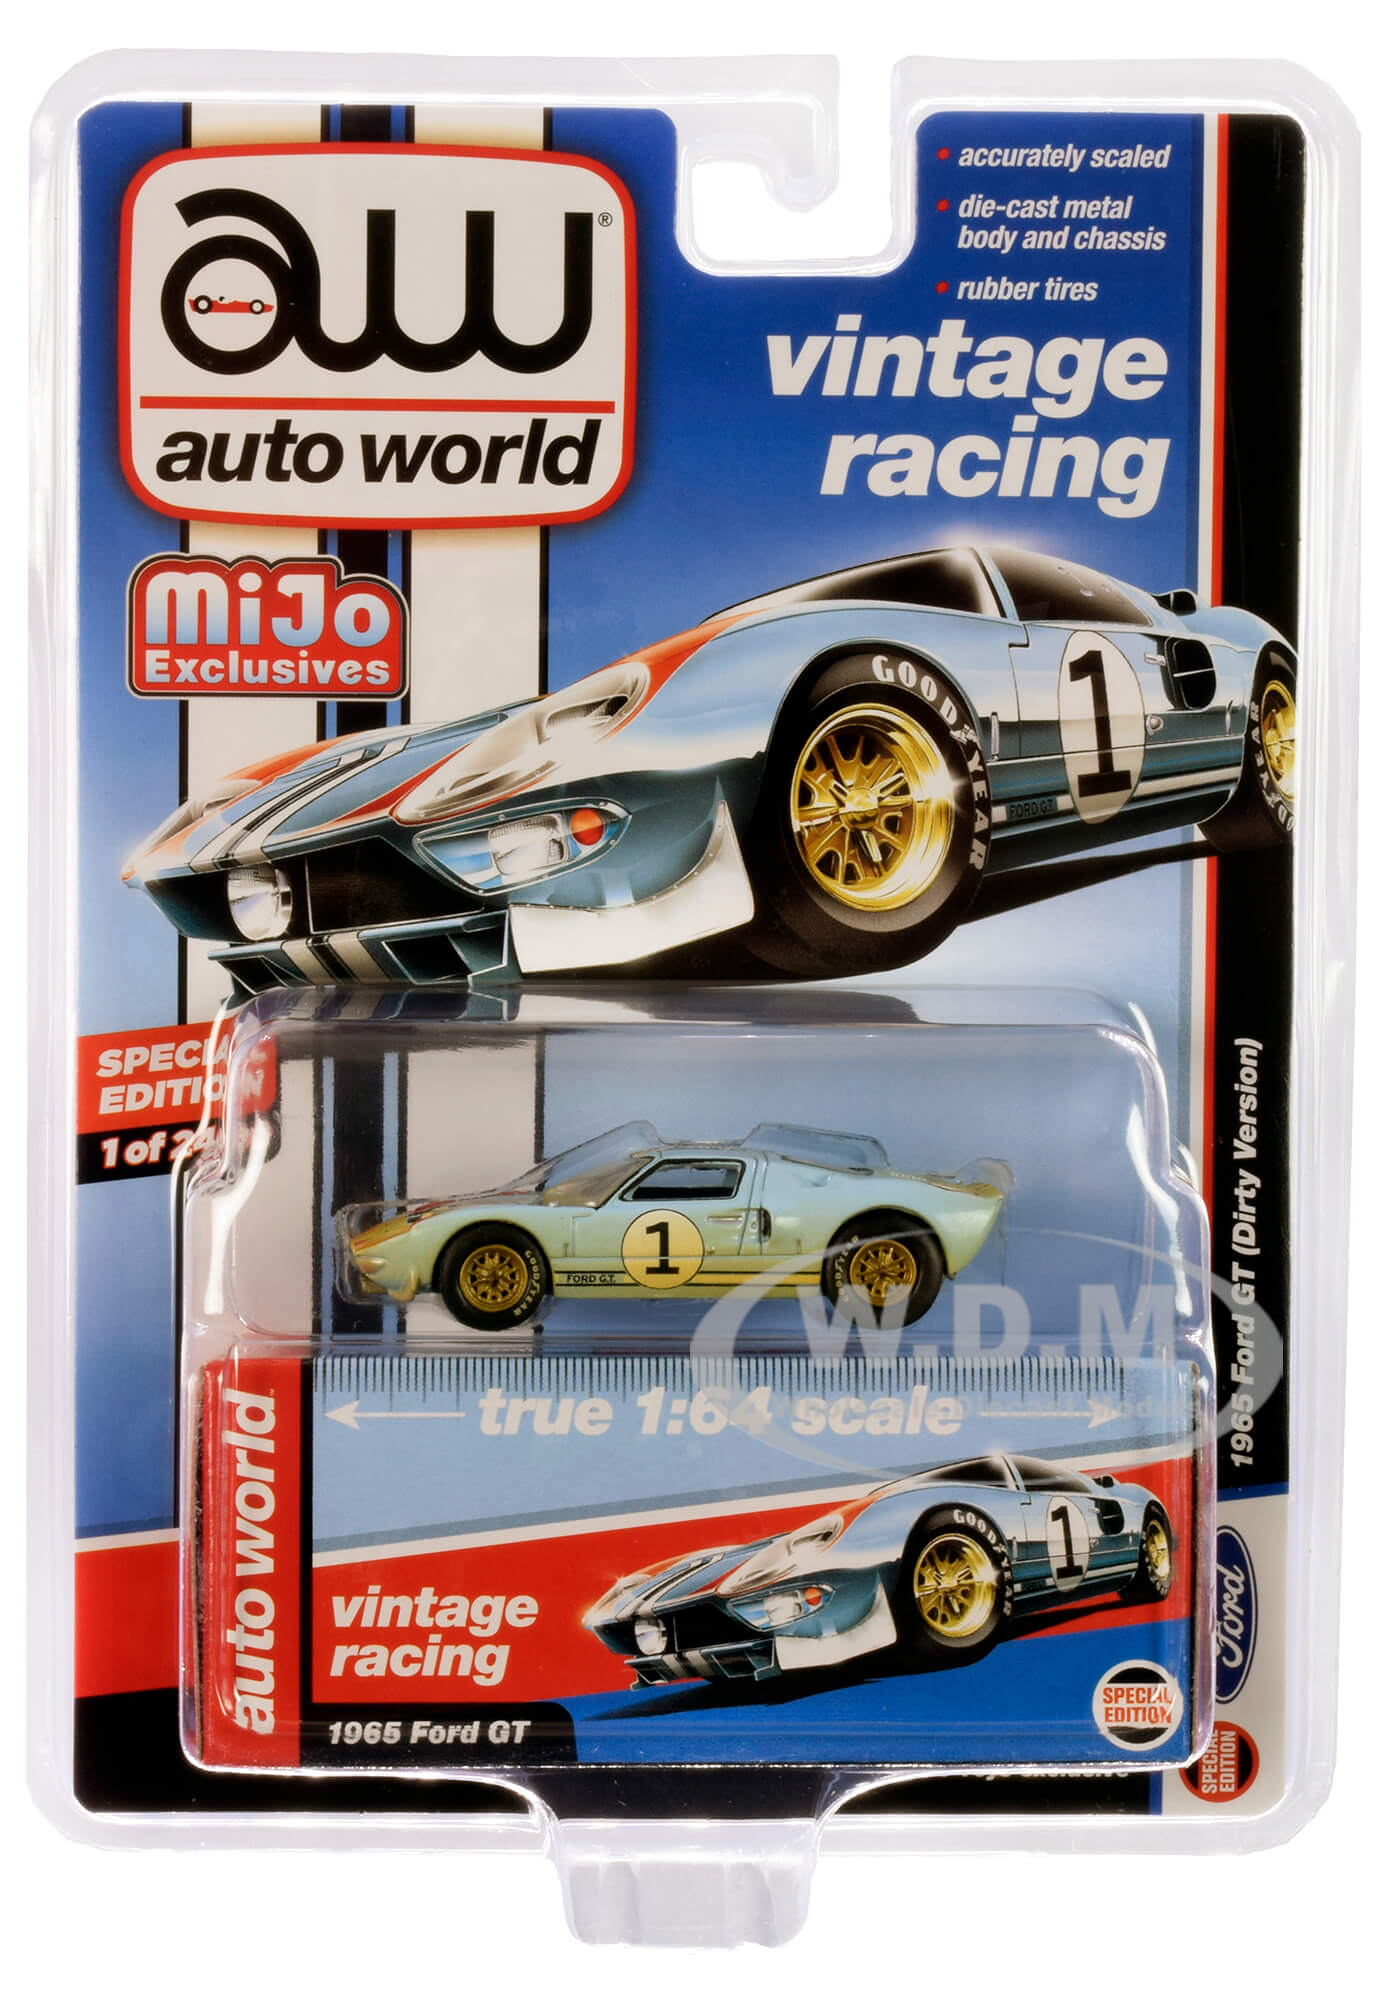 1965 Ford Gt 1 Light Blue With Red And White Stripes (dirty Version) "vintage Racing" Limited Edition To 2400 Pieces Worldwide 1/64 Diecast Model Car